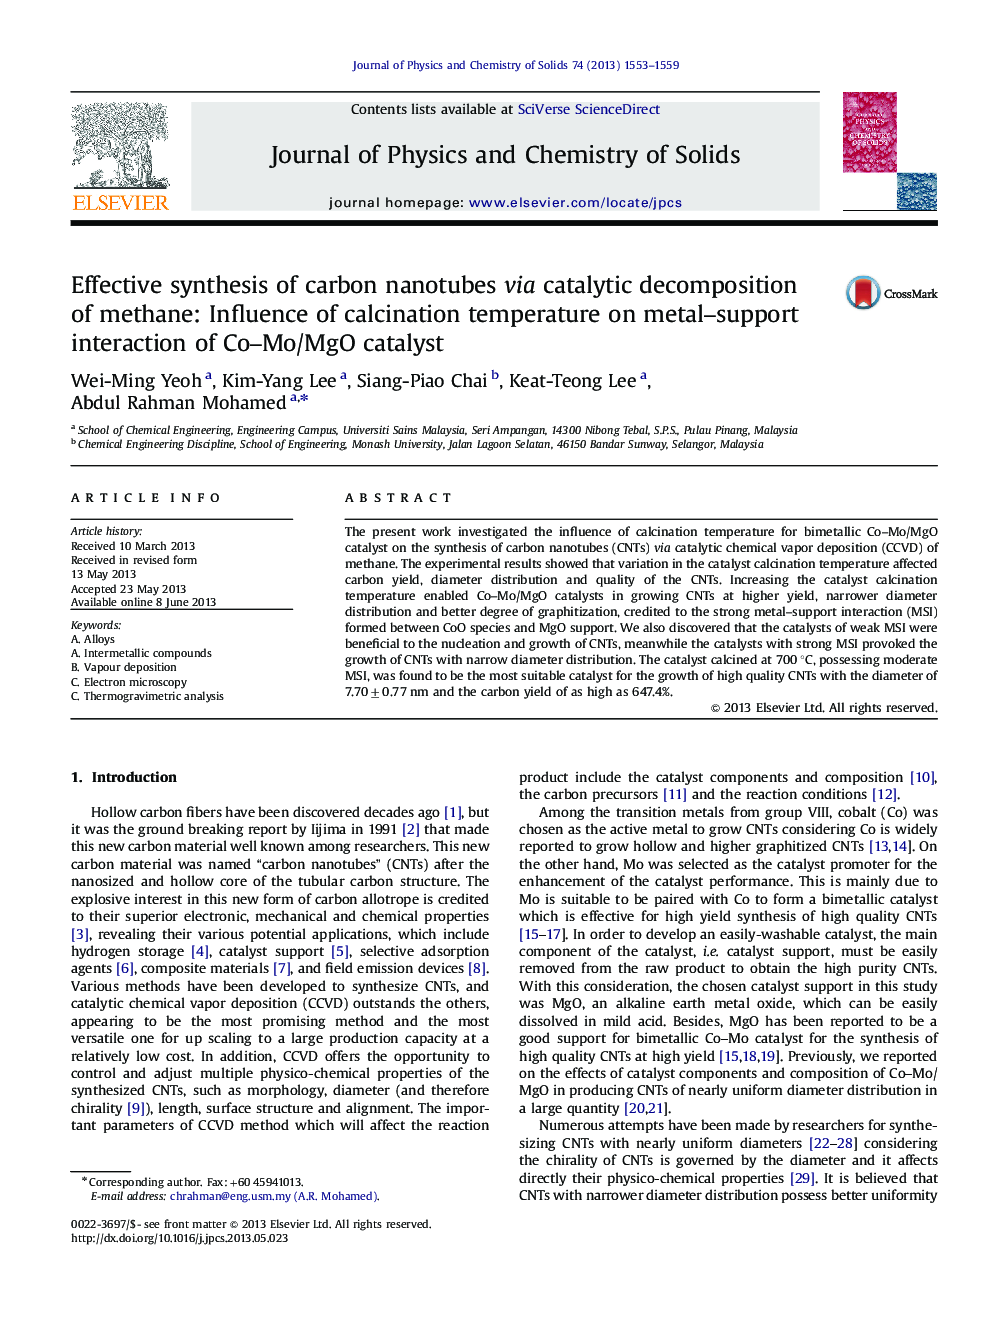 Effective synthesis of carbon nanotubes via catalytic decomposition of methane: Influence of calcination temperature on metal–support interaction of Co–Mo/MgO catalyst